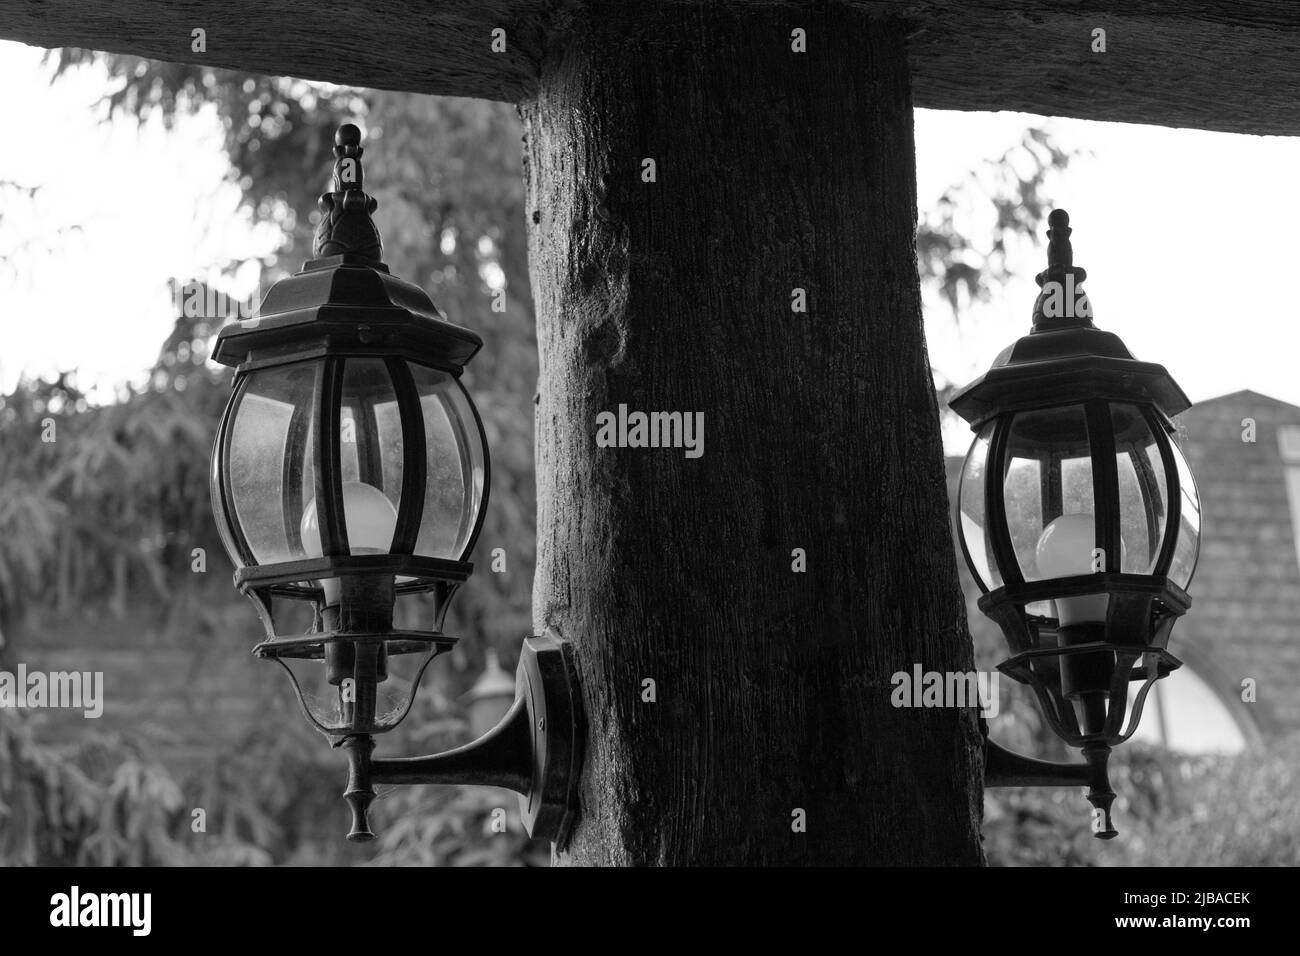 Old style metallic lanterns attached to wooden pillar, with trees in the background, black and white Stock Photo